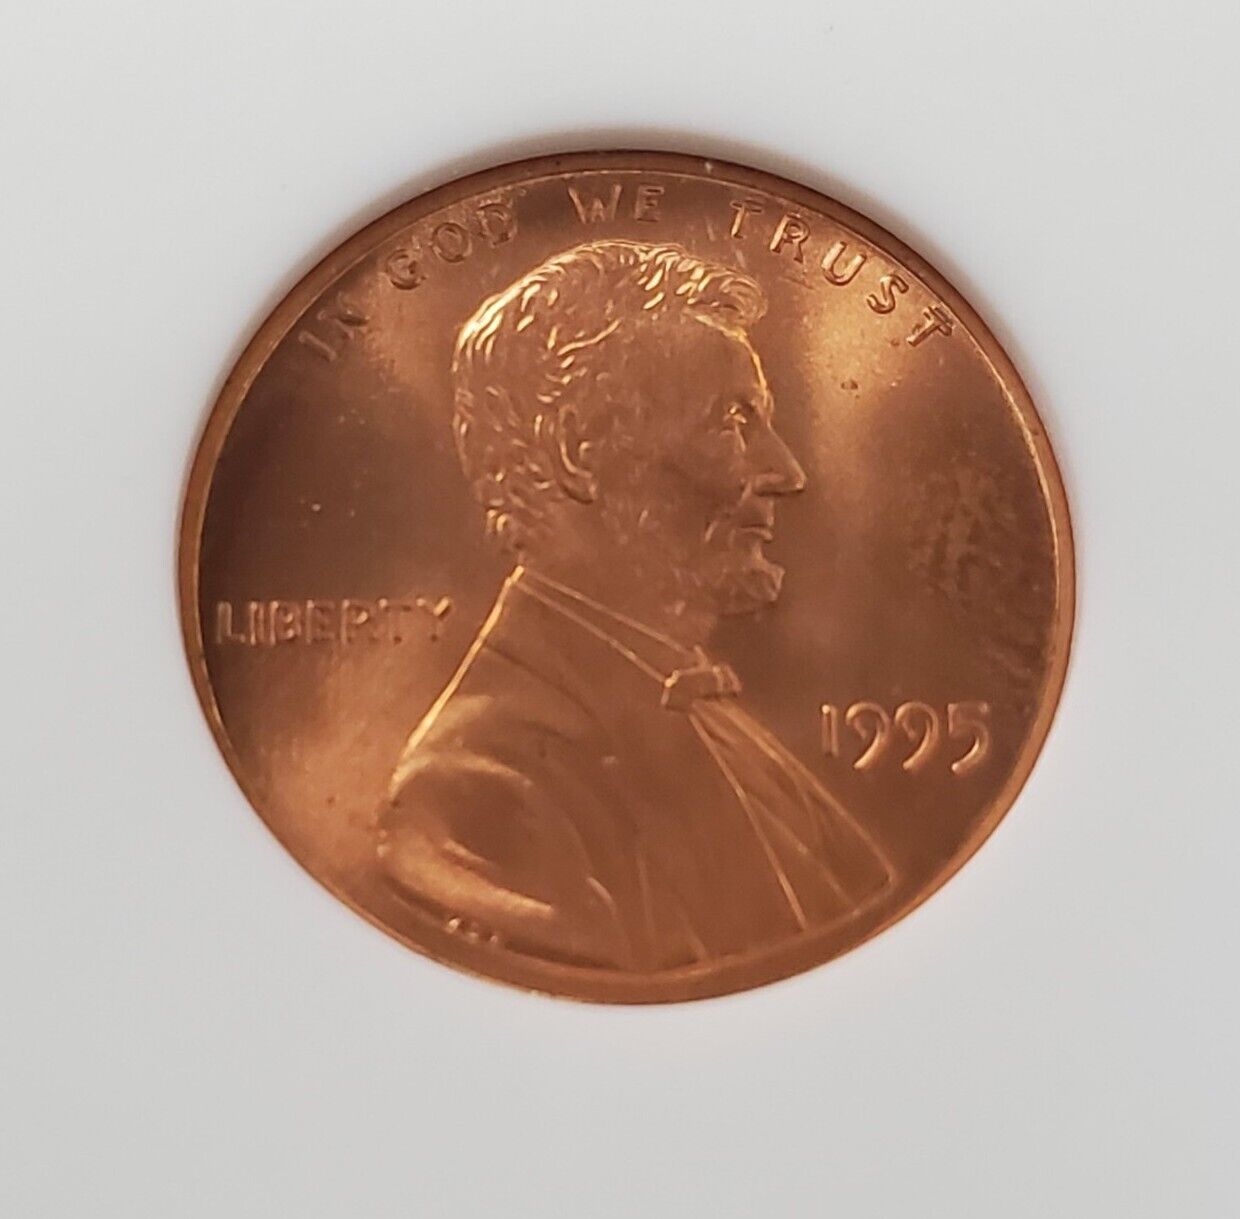 1995 P Lincoln Memorial Cent Penny Coin ANACS MS67 RED OBV DIE DAMAGE